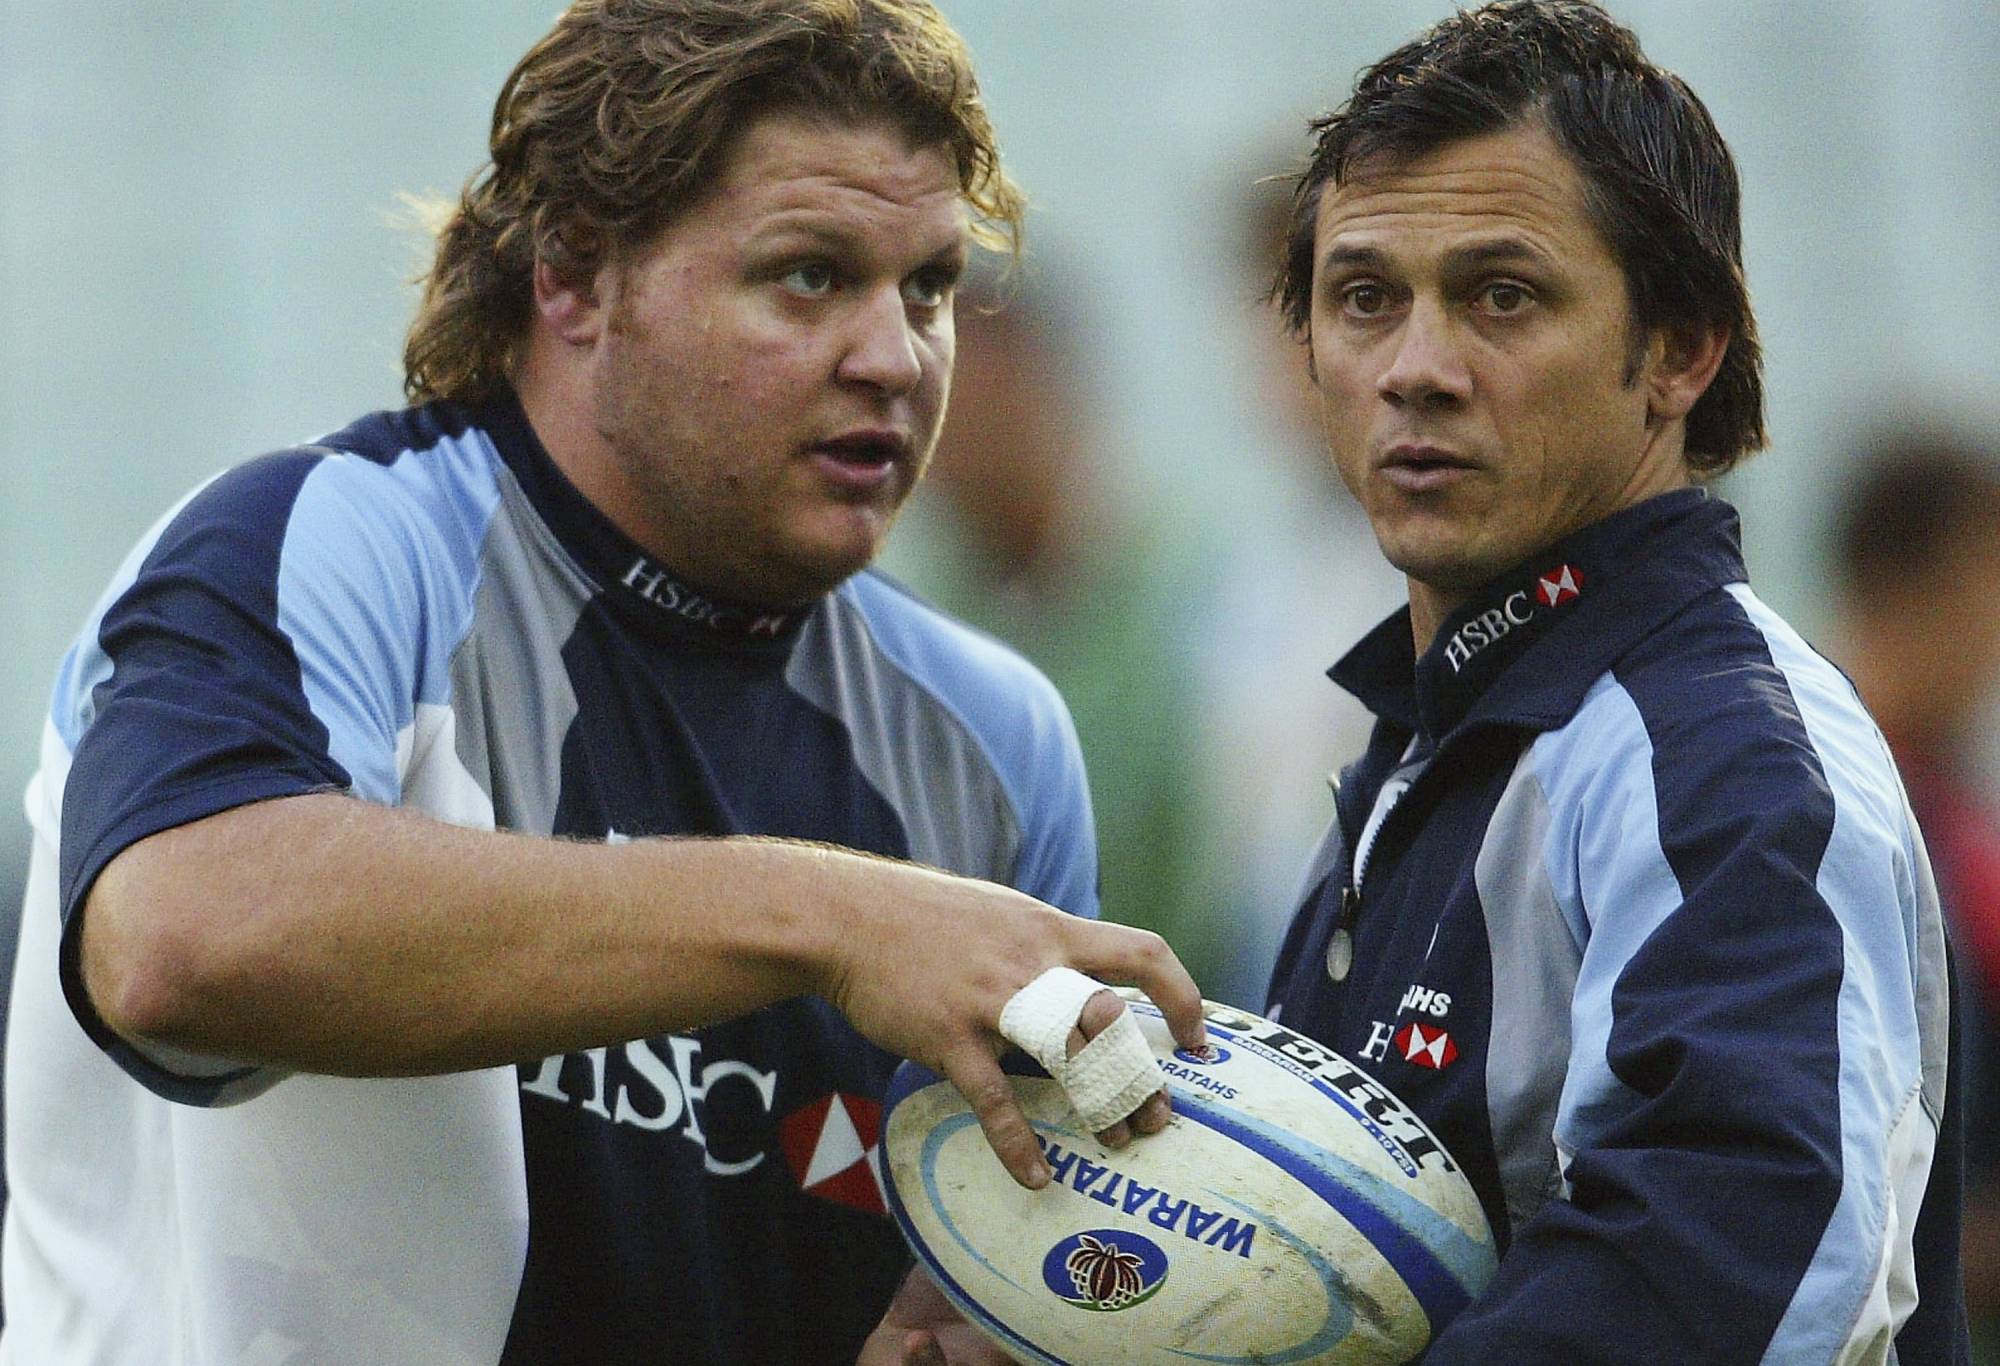 Matt Dunning (L) of the Waratahs is watched by Waratahs defence coach Les Kiss during the Waratahs public training session at Aussie Stadium May 24, 2005 in Sydney, Australia. (Photo by Mark Nolan/Getty Images)